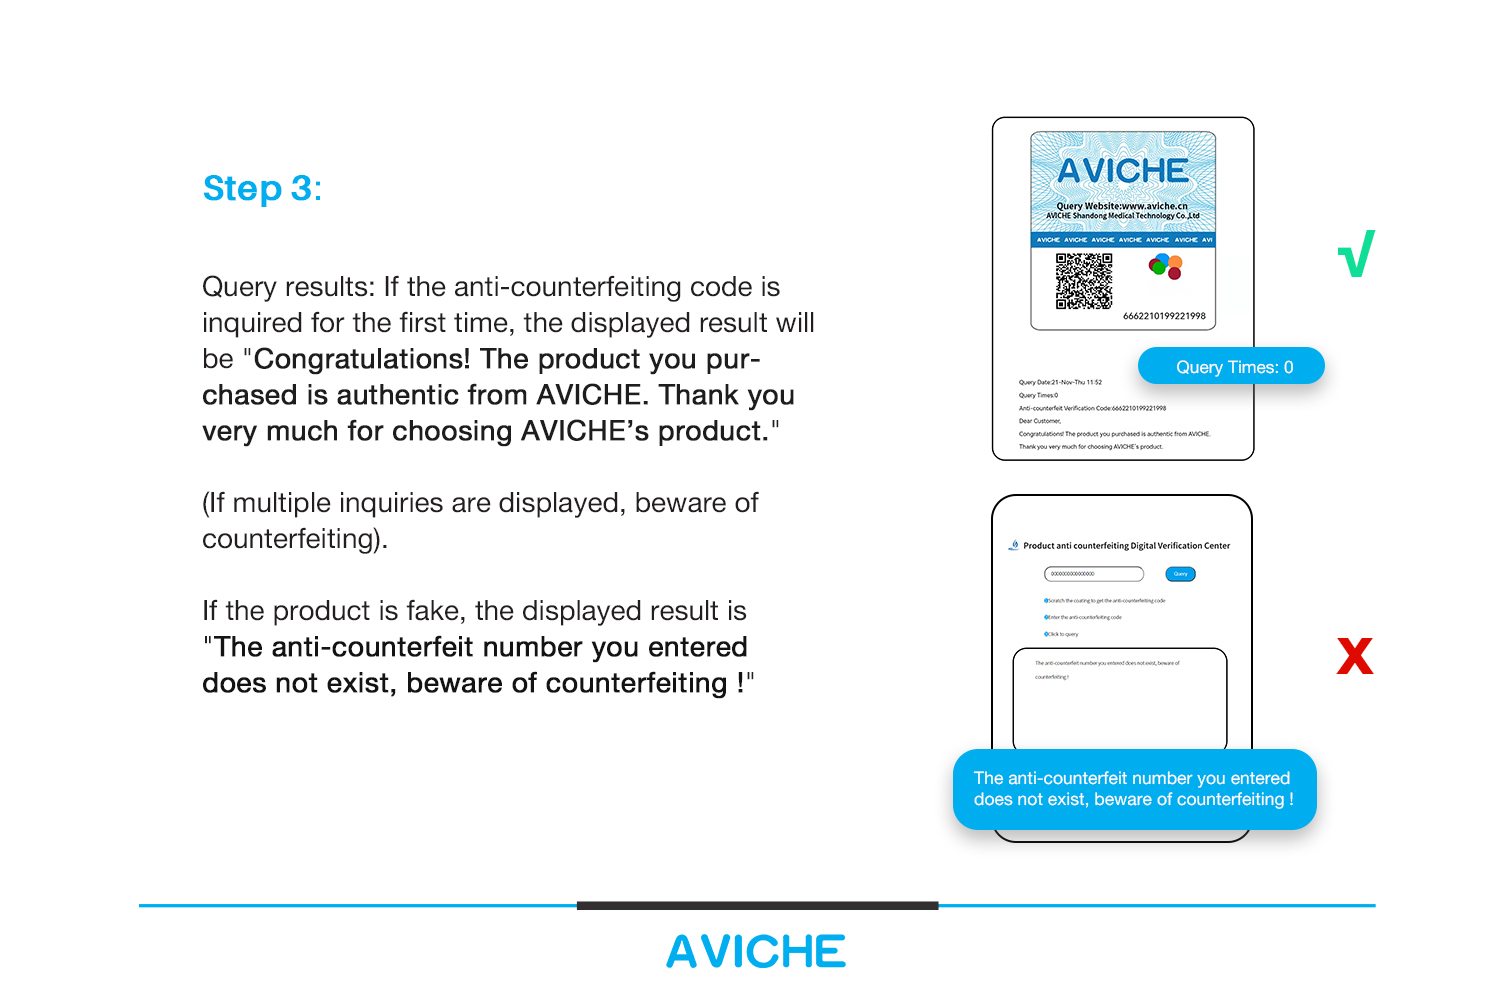 Official Anti-Counterfeiting Statement from AVICHE